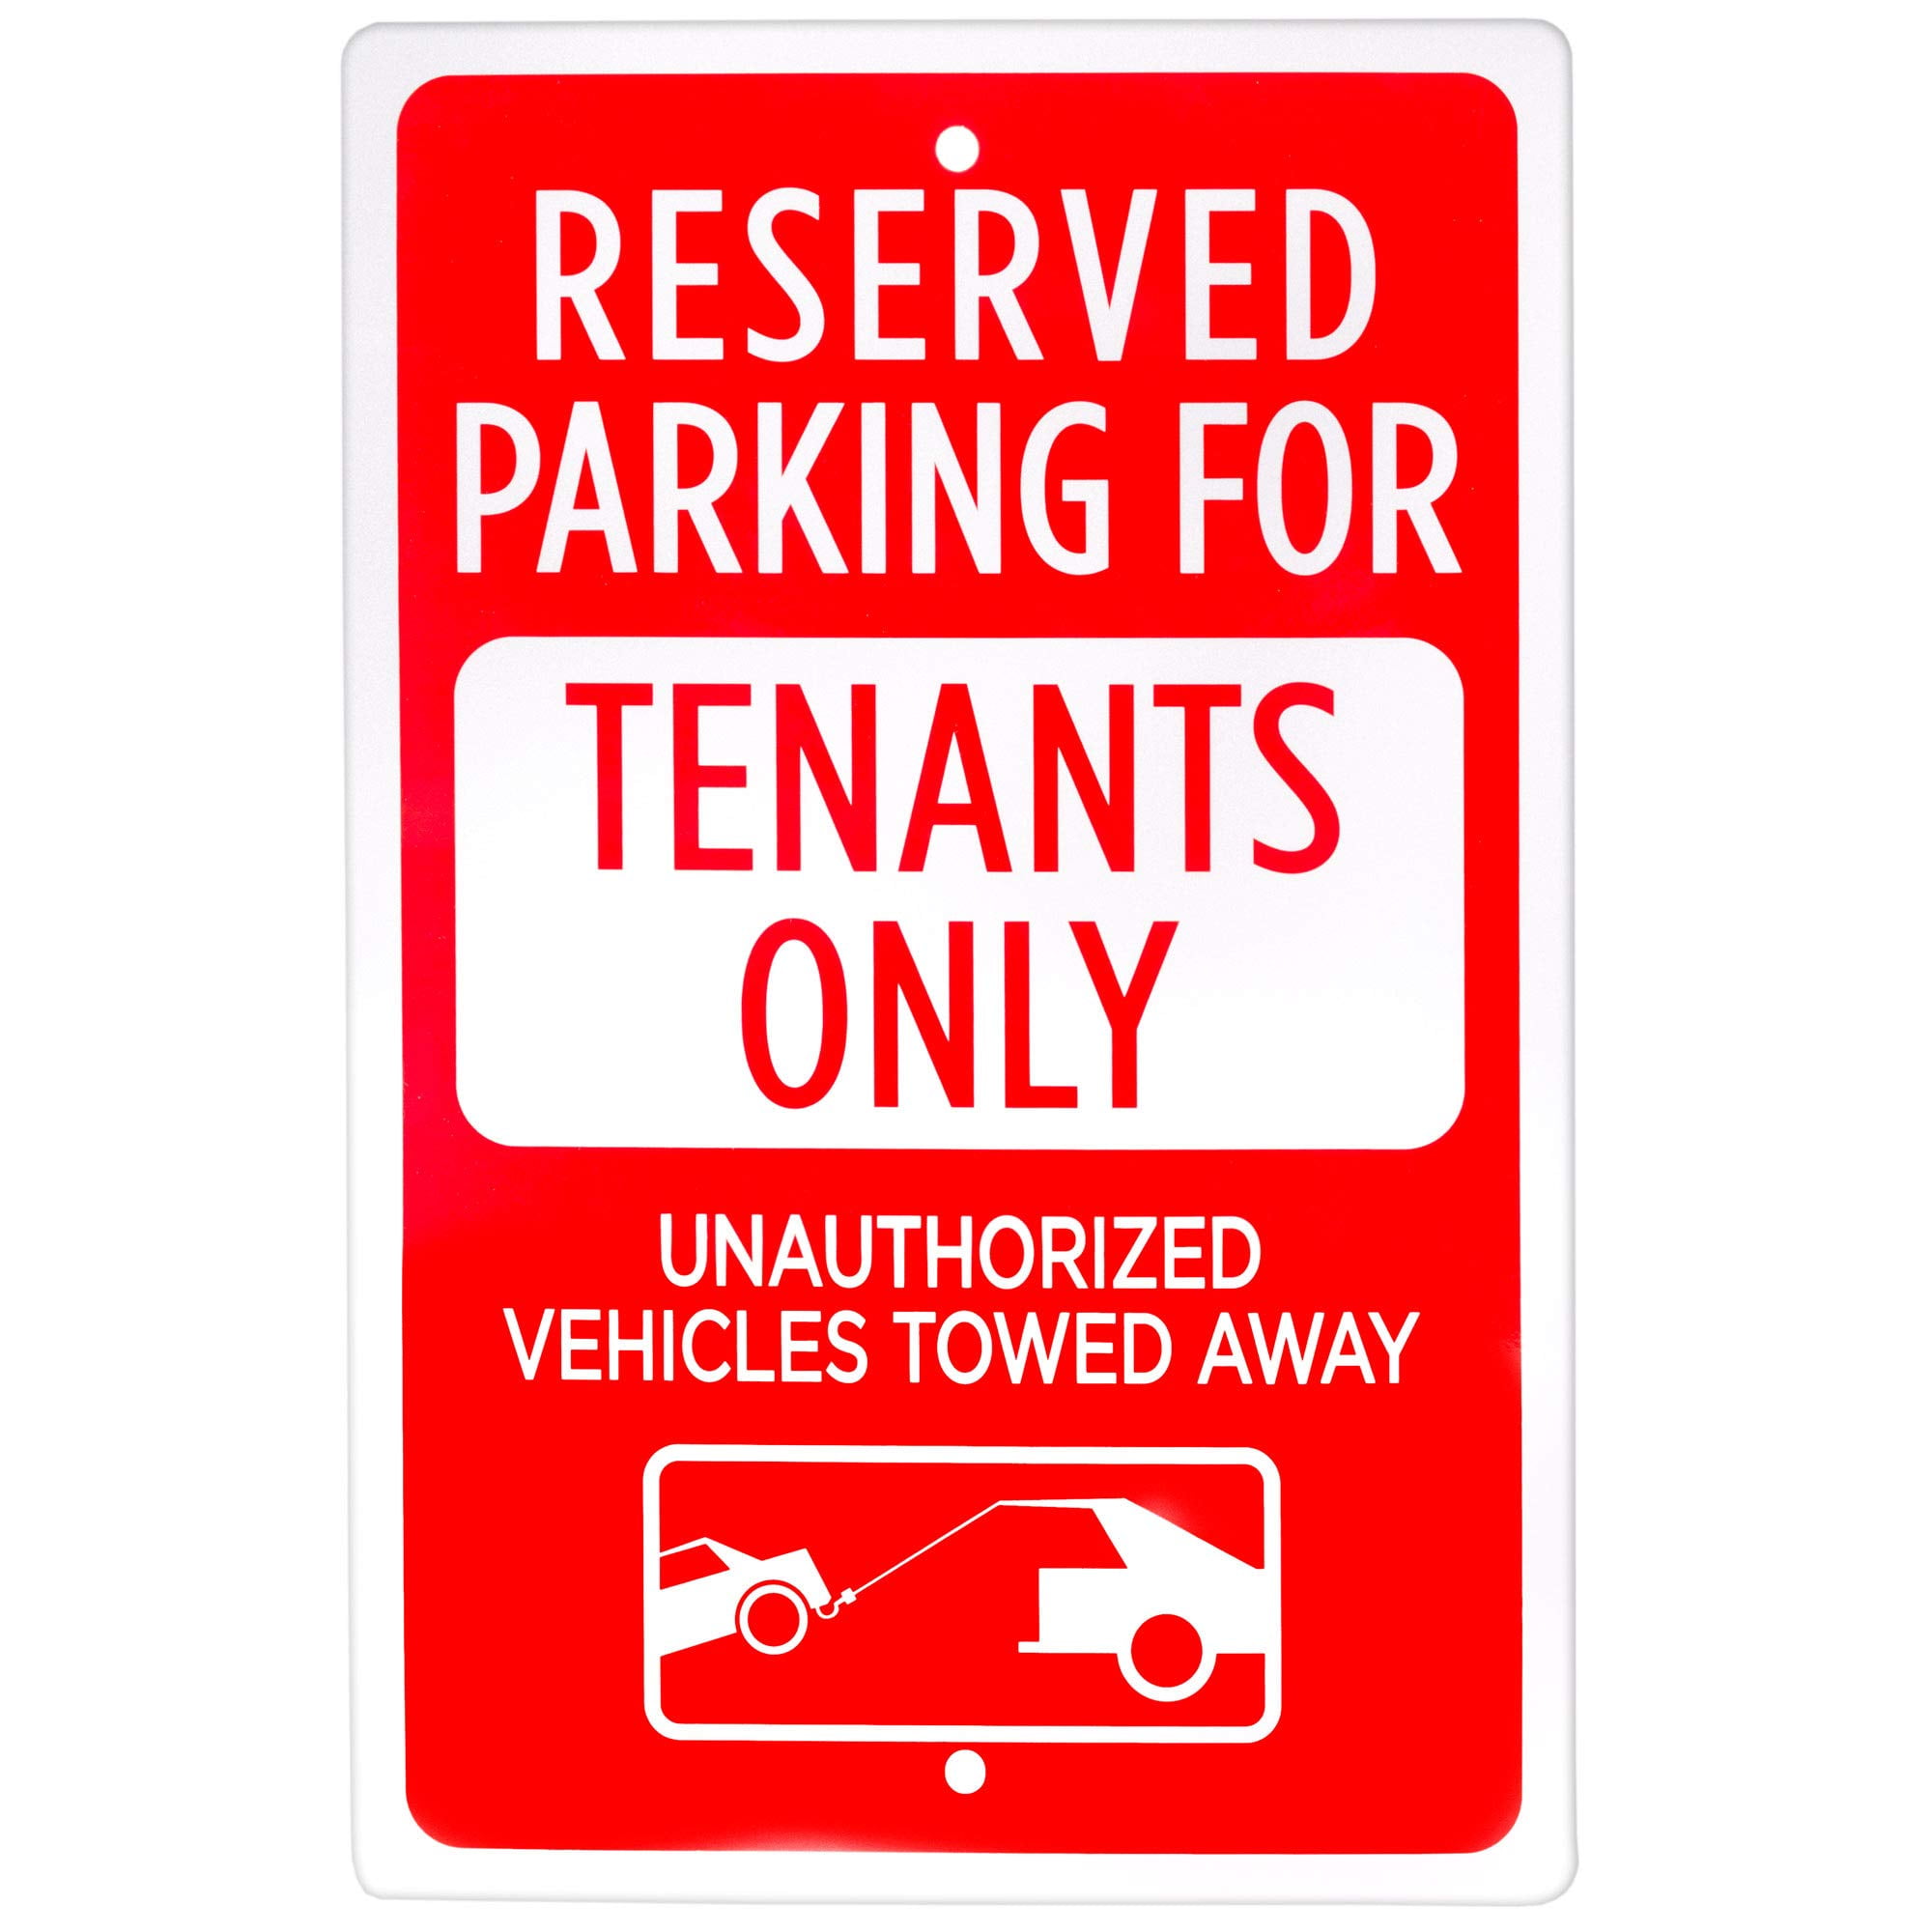 Isgn-016 Parking Reserved For Tenants Only Sign